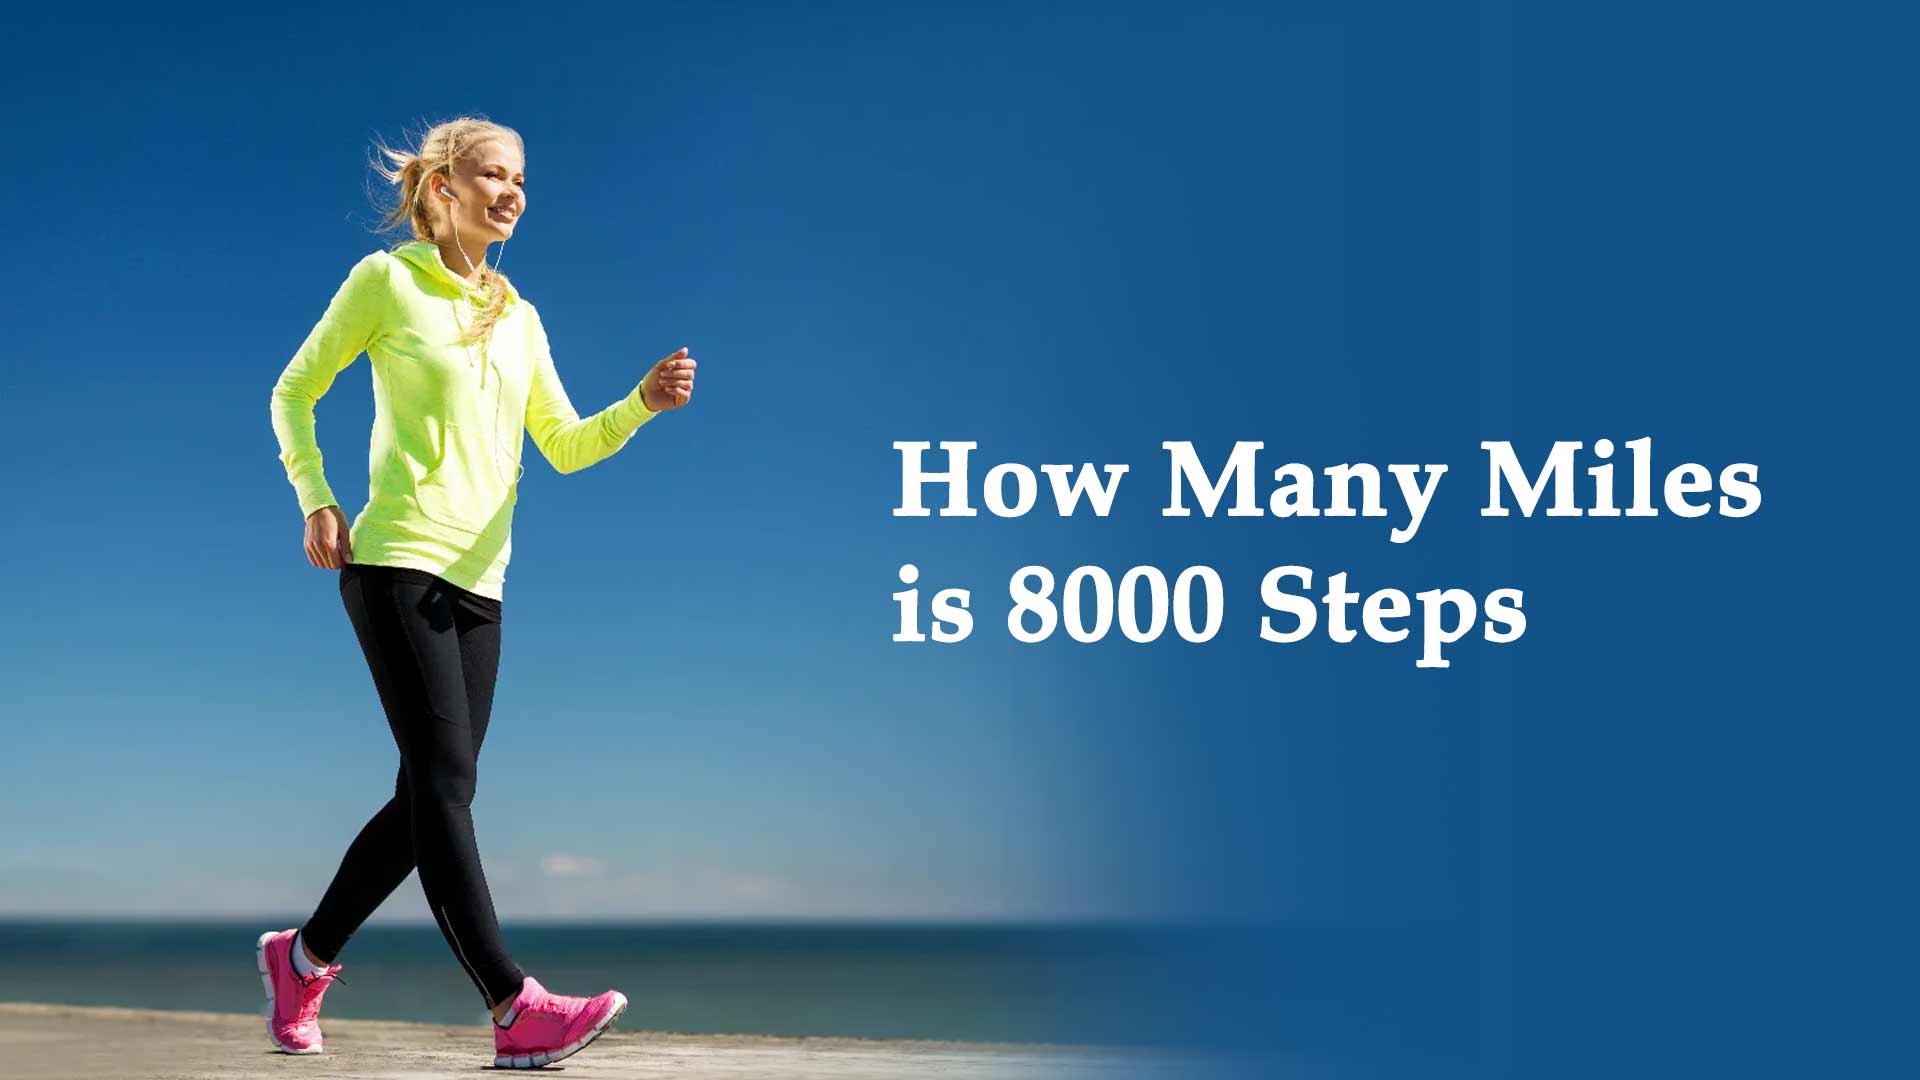 How Many Miles is 8000 Steps